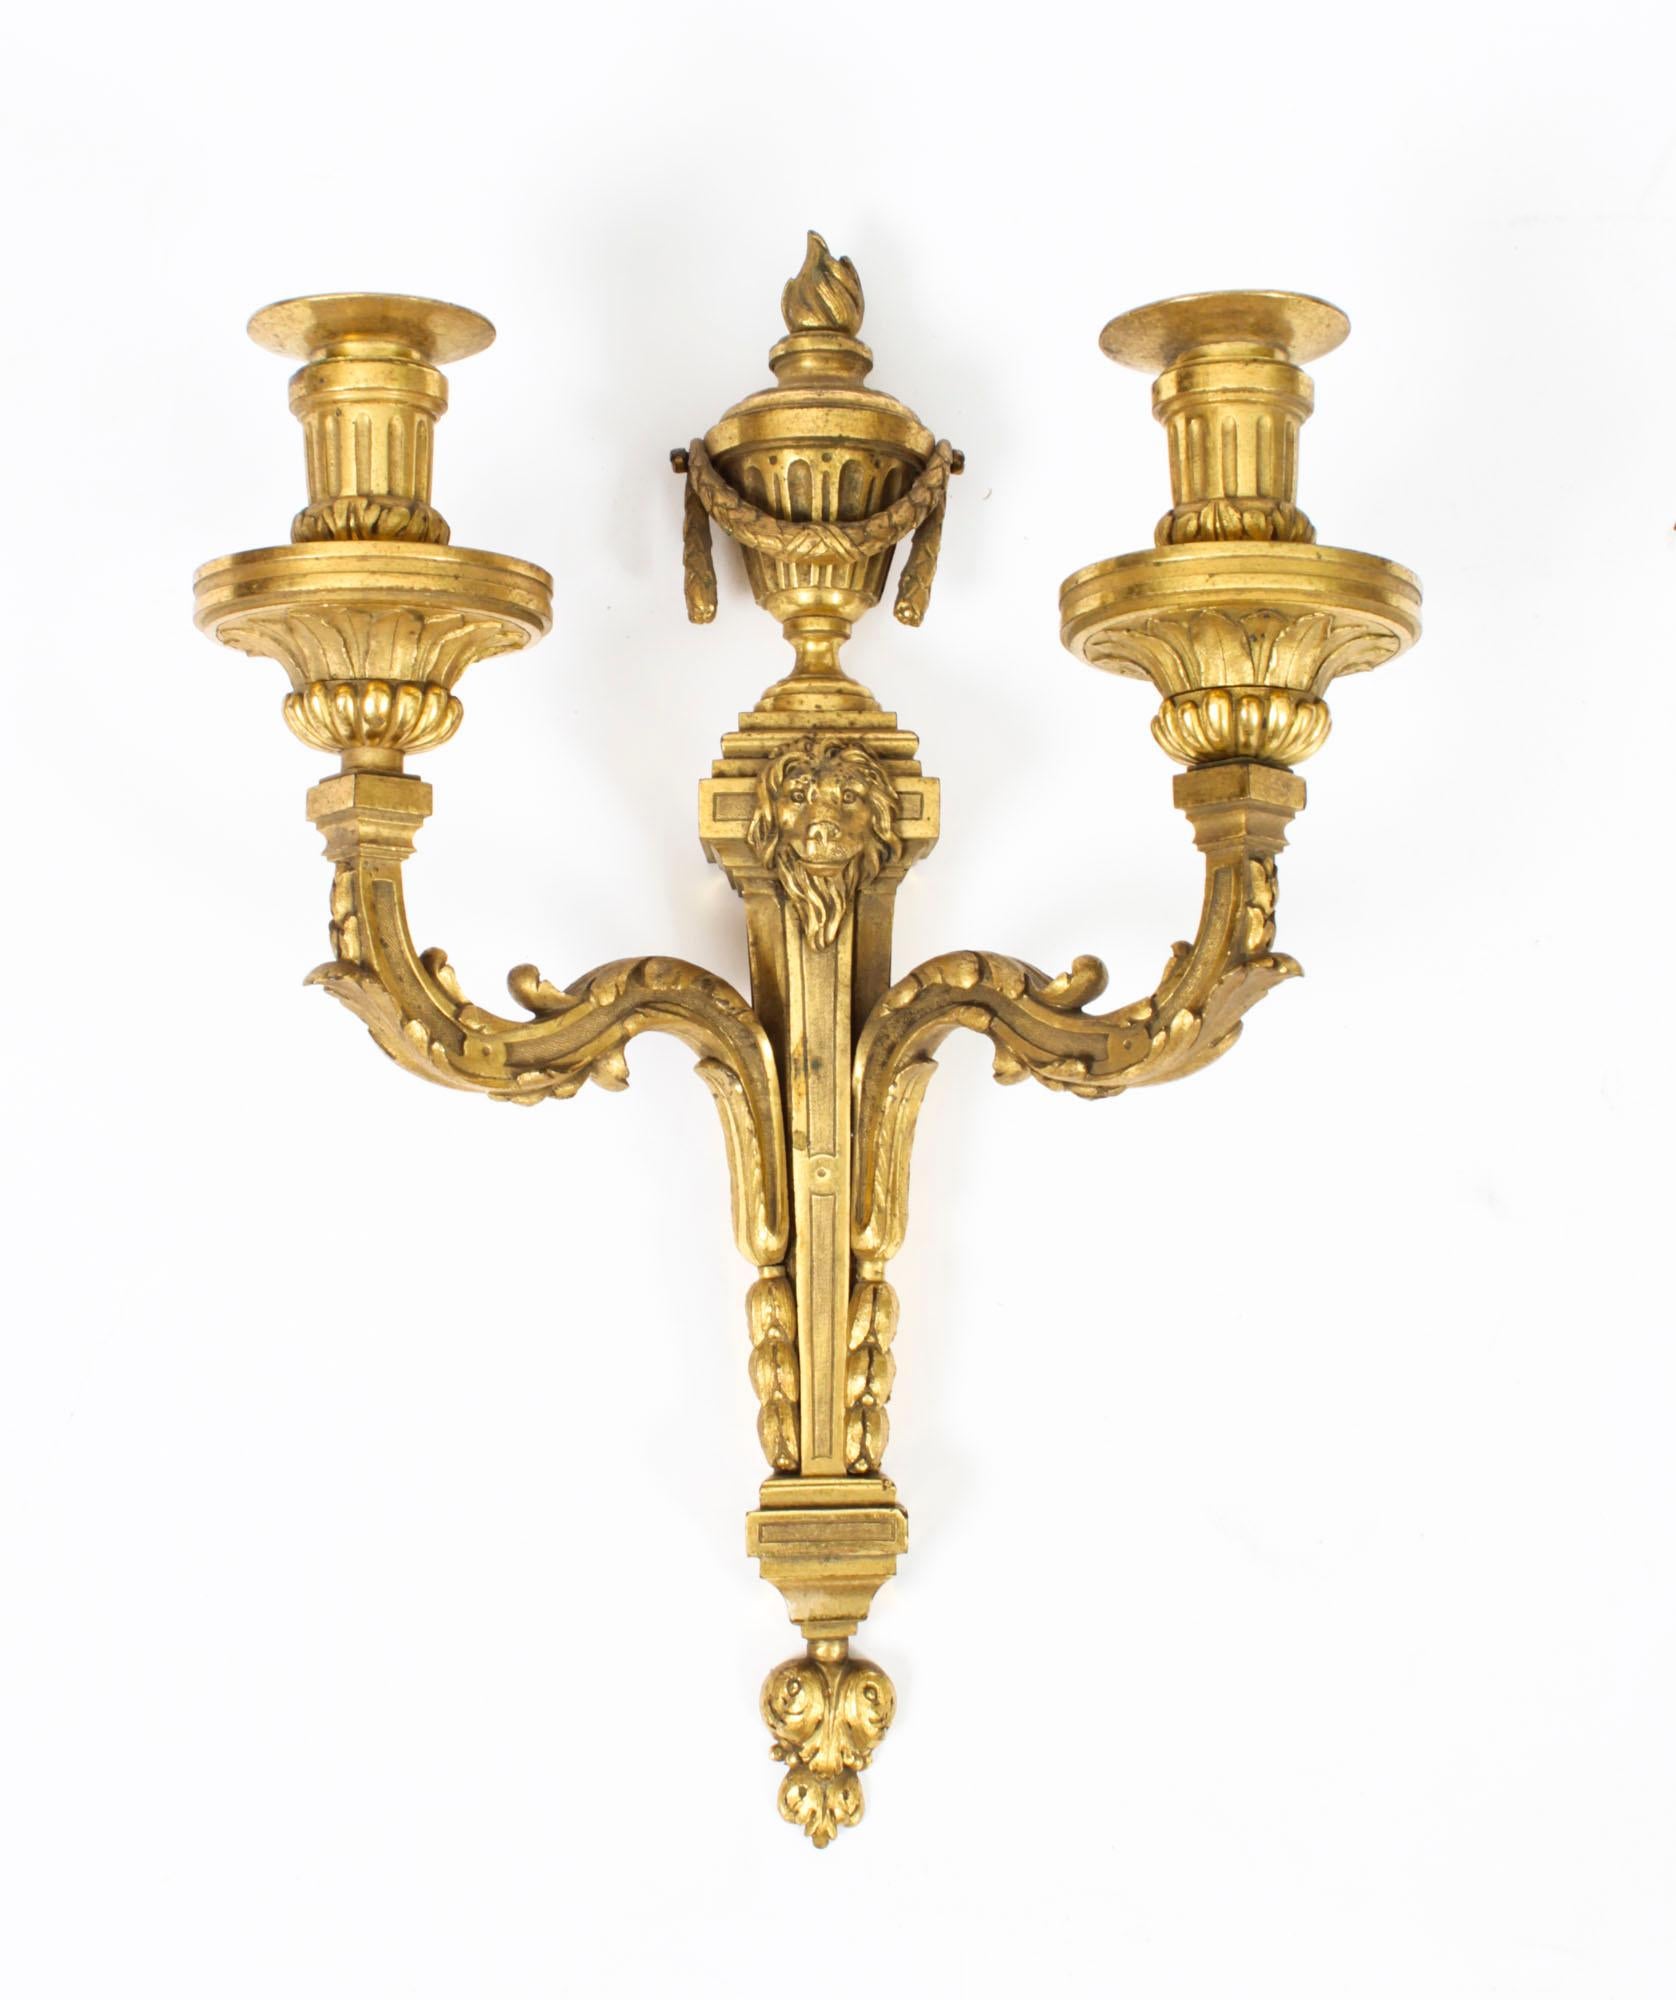 This is a fine pair of antique Regency Revival twin branch ormolu wall candle lights dating from Circa 1850.
 
The wall lights feature torch urn shaped tops above tapering bodies with lions mask mounts, each with acanthus leaf cast shaped branch